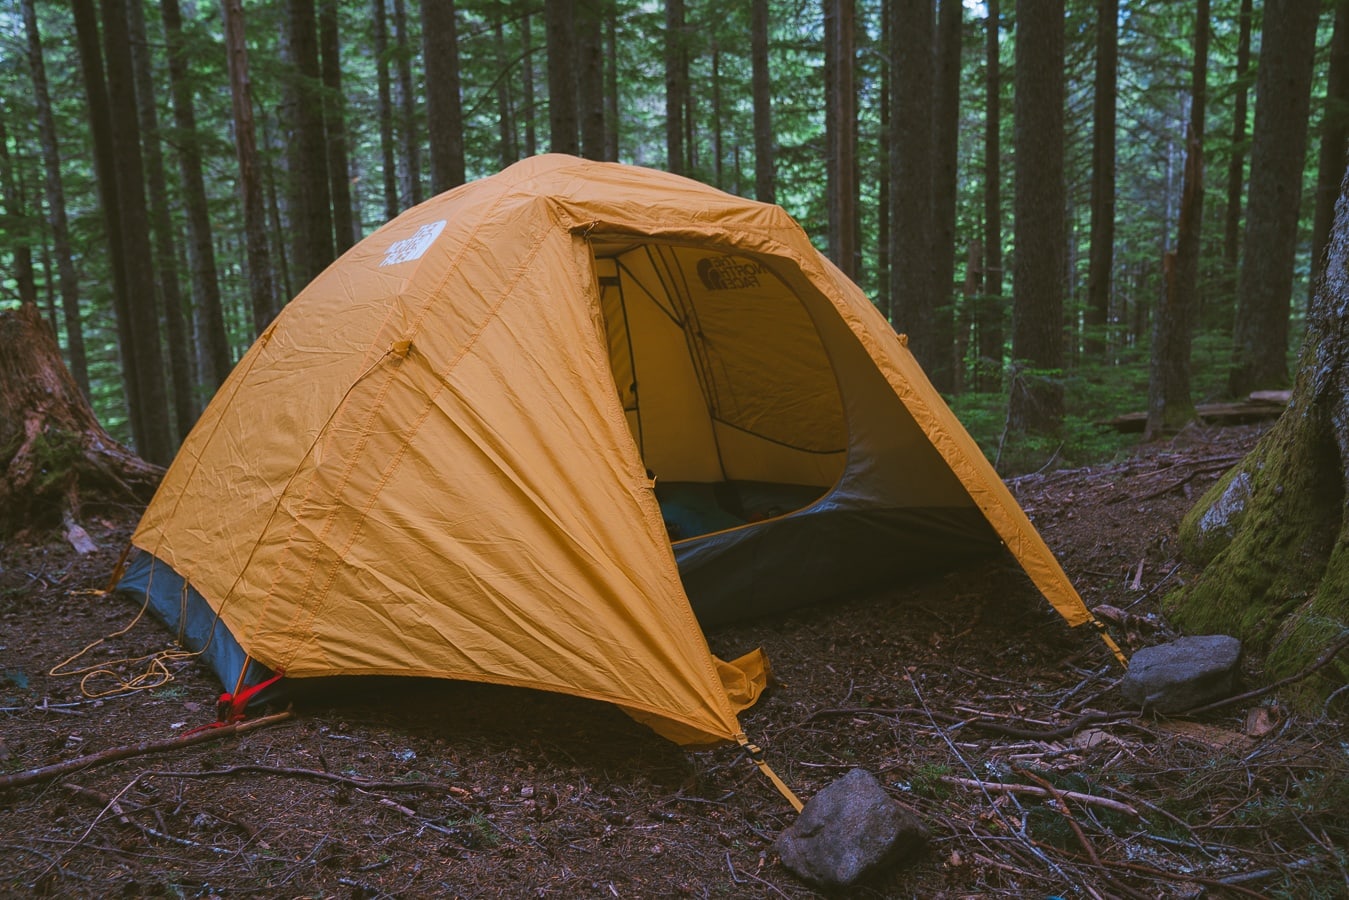 7 Principles Of Leave No Trace: tent on a durable surface